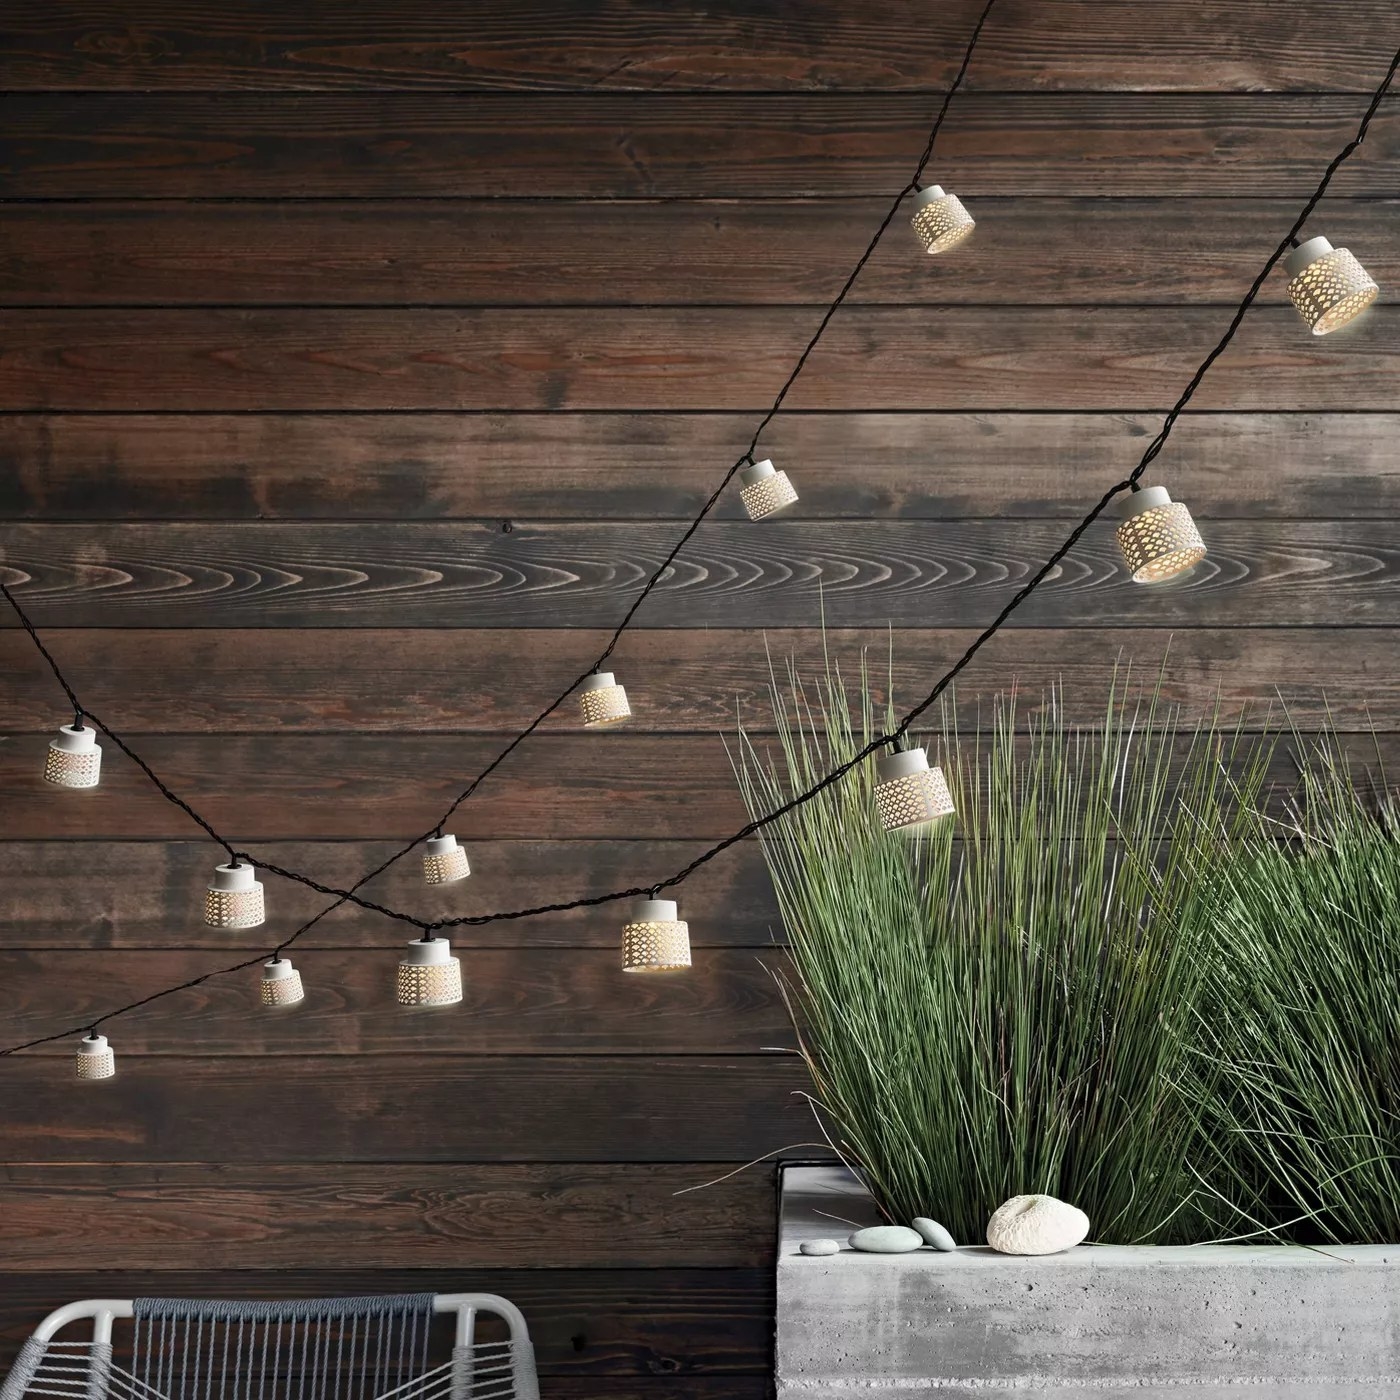 The lantern string lights with punched details hanging in a backyard